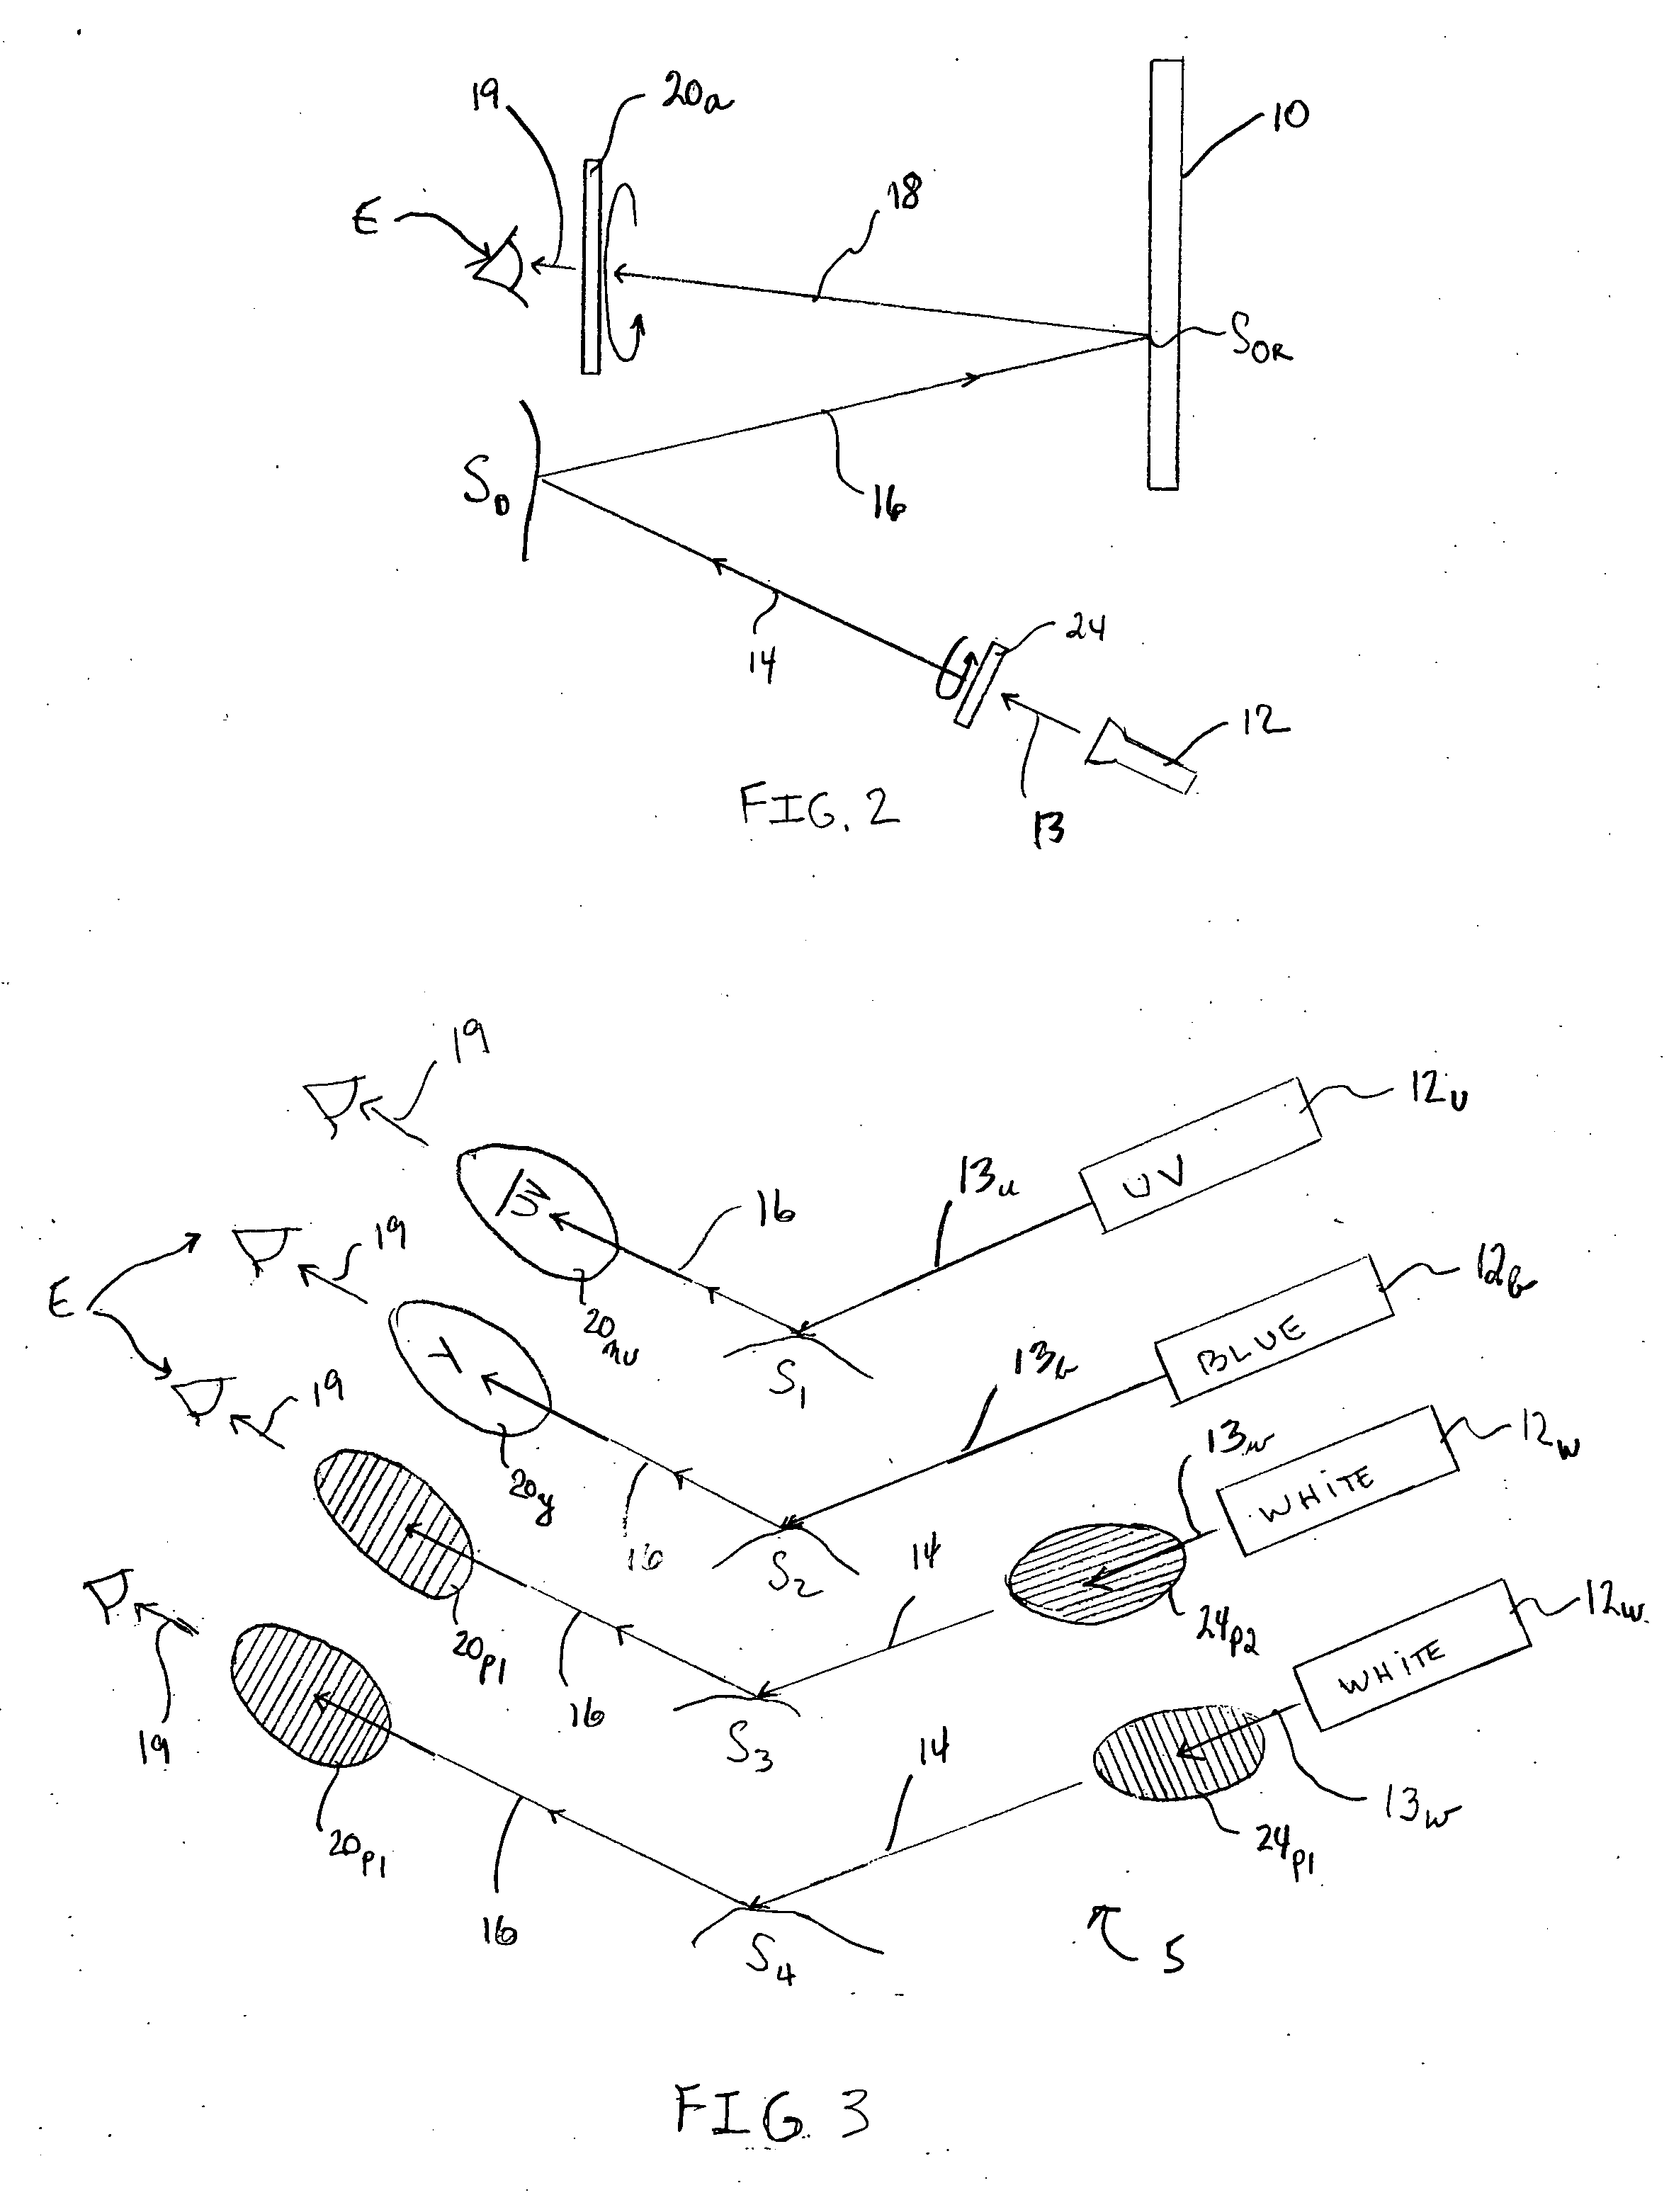 Apparatus and method for viewing the skin